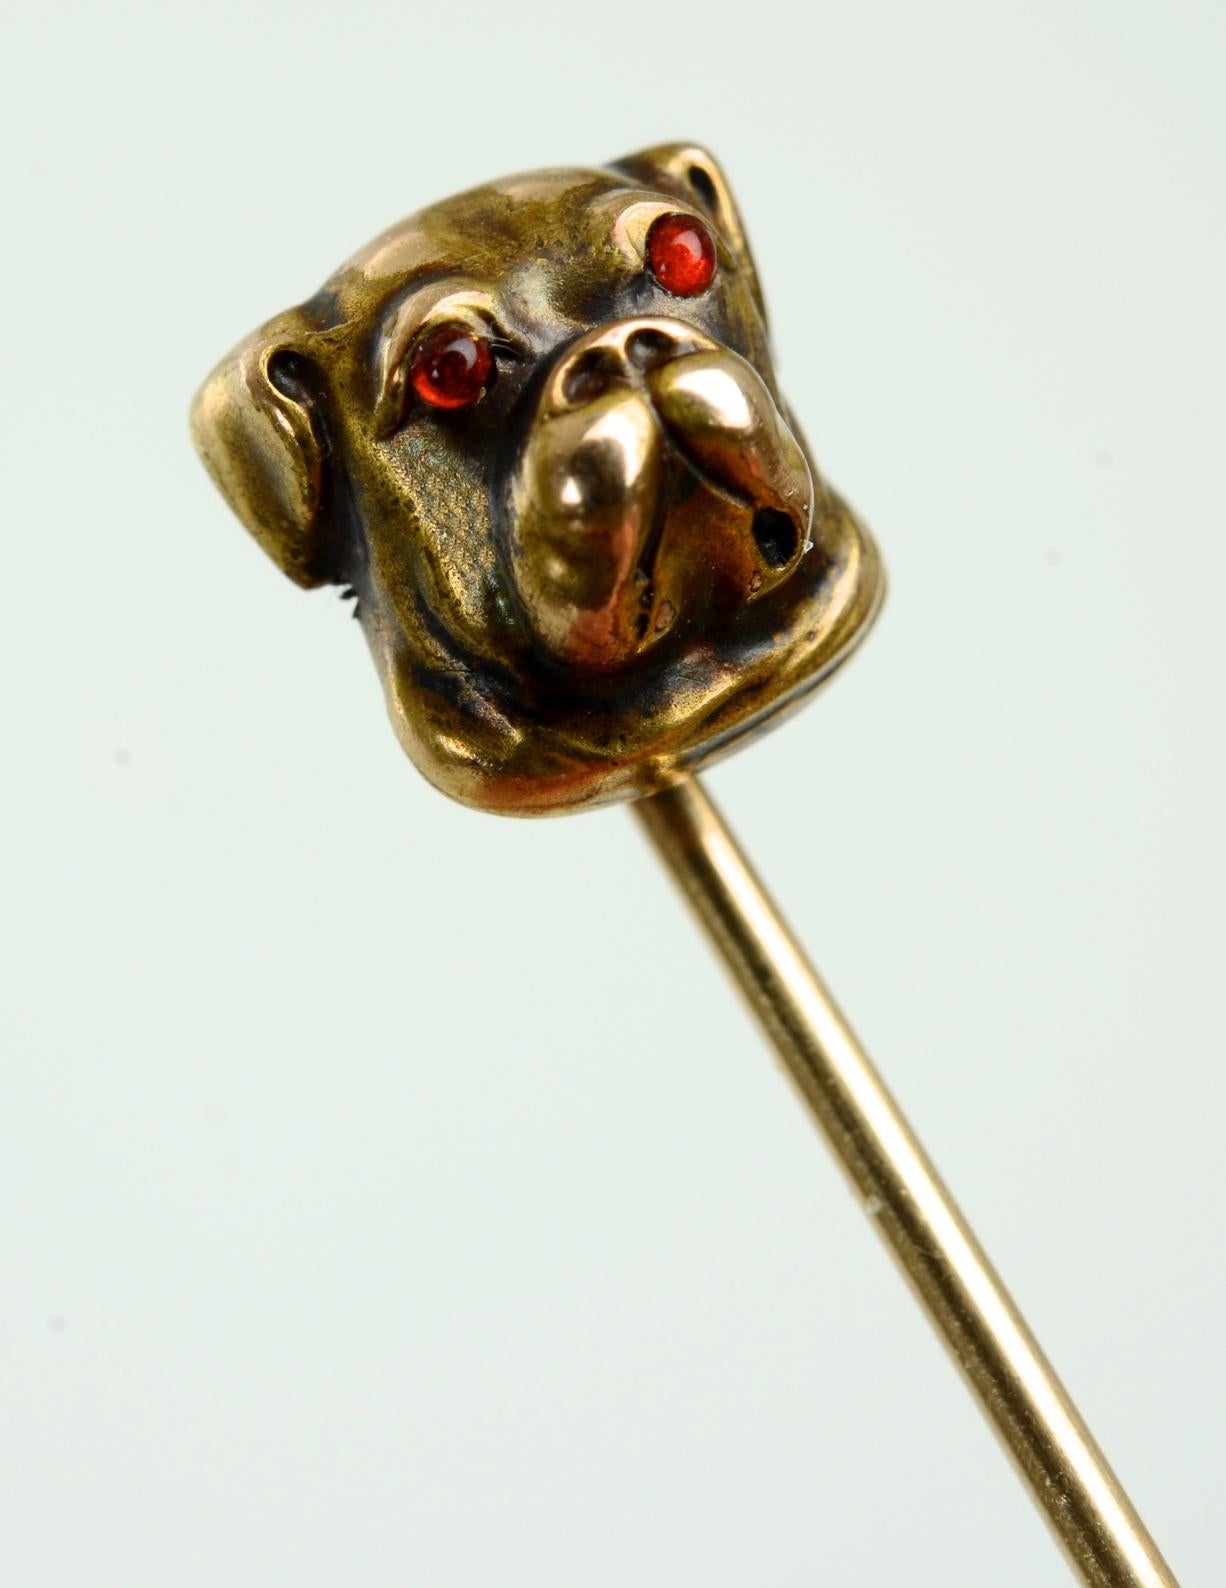 14K Yellow Gold Bull Dog Stick Pin with Cabochon Ruby Eyes. Un-marked, tested 14K gold. With beautiful patina.
N.P. Trent has been a respected name in antiques for over 30 years with a large collection of antique and vintage jewelry.